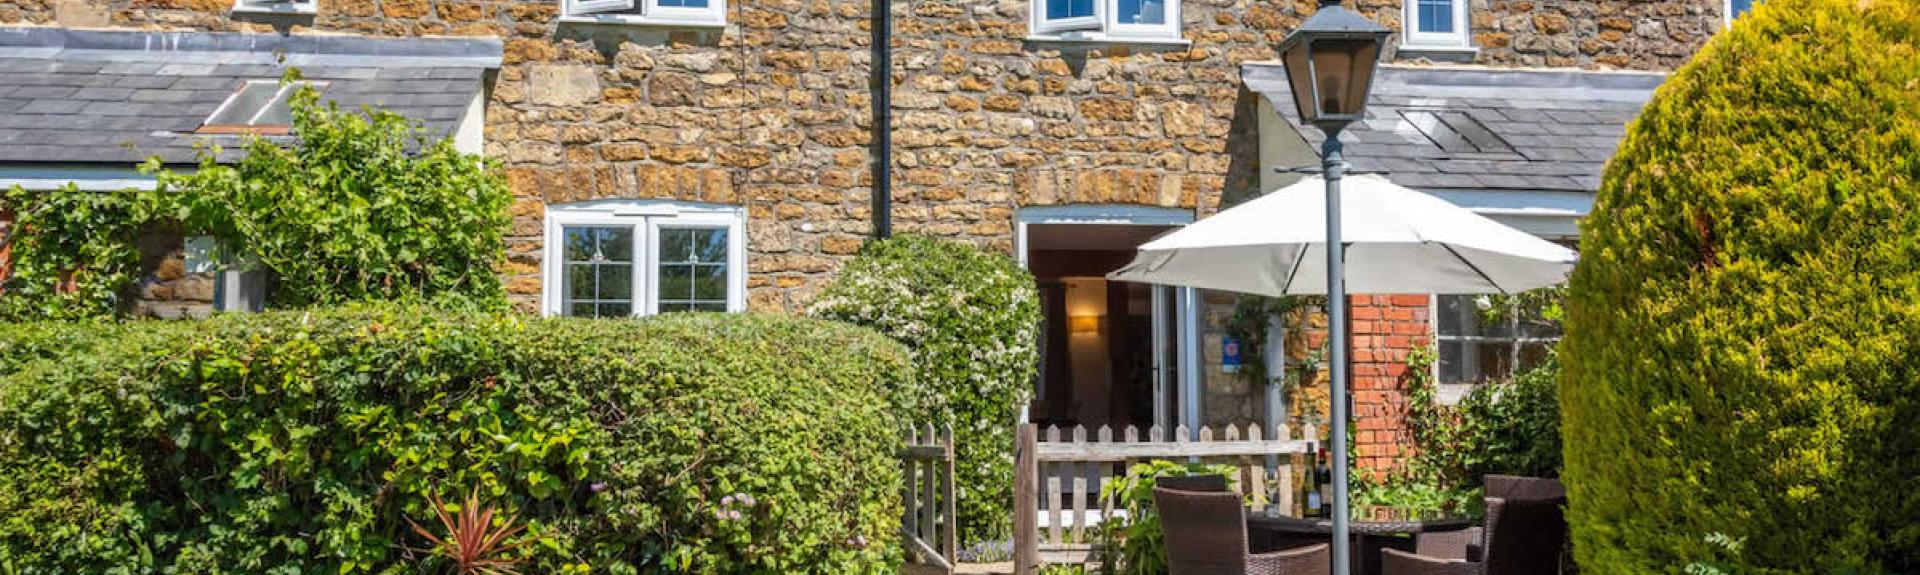 Exterior and front garden of a stone-built Dorset holiday cottage with outdoor dining furniture on its terrace.